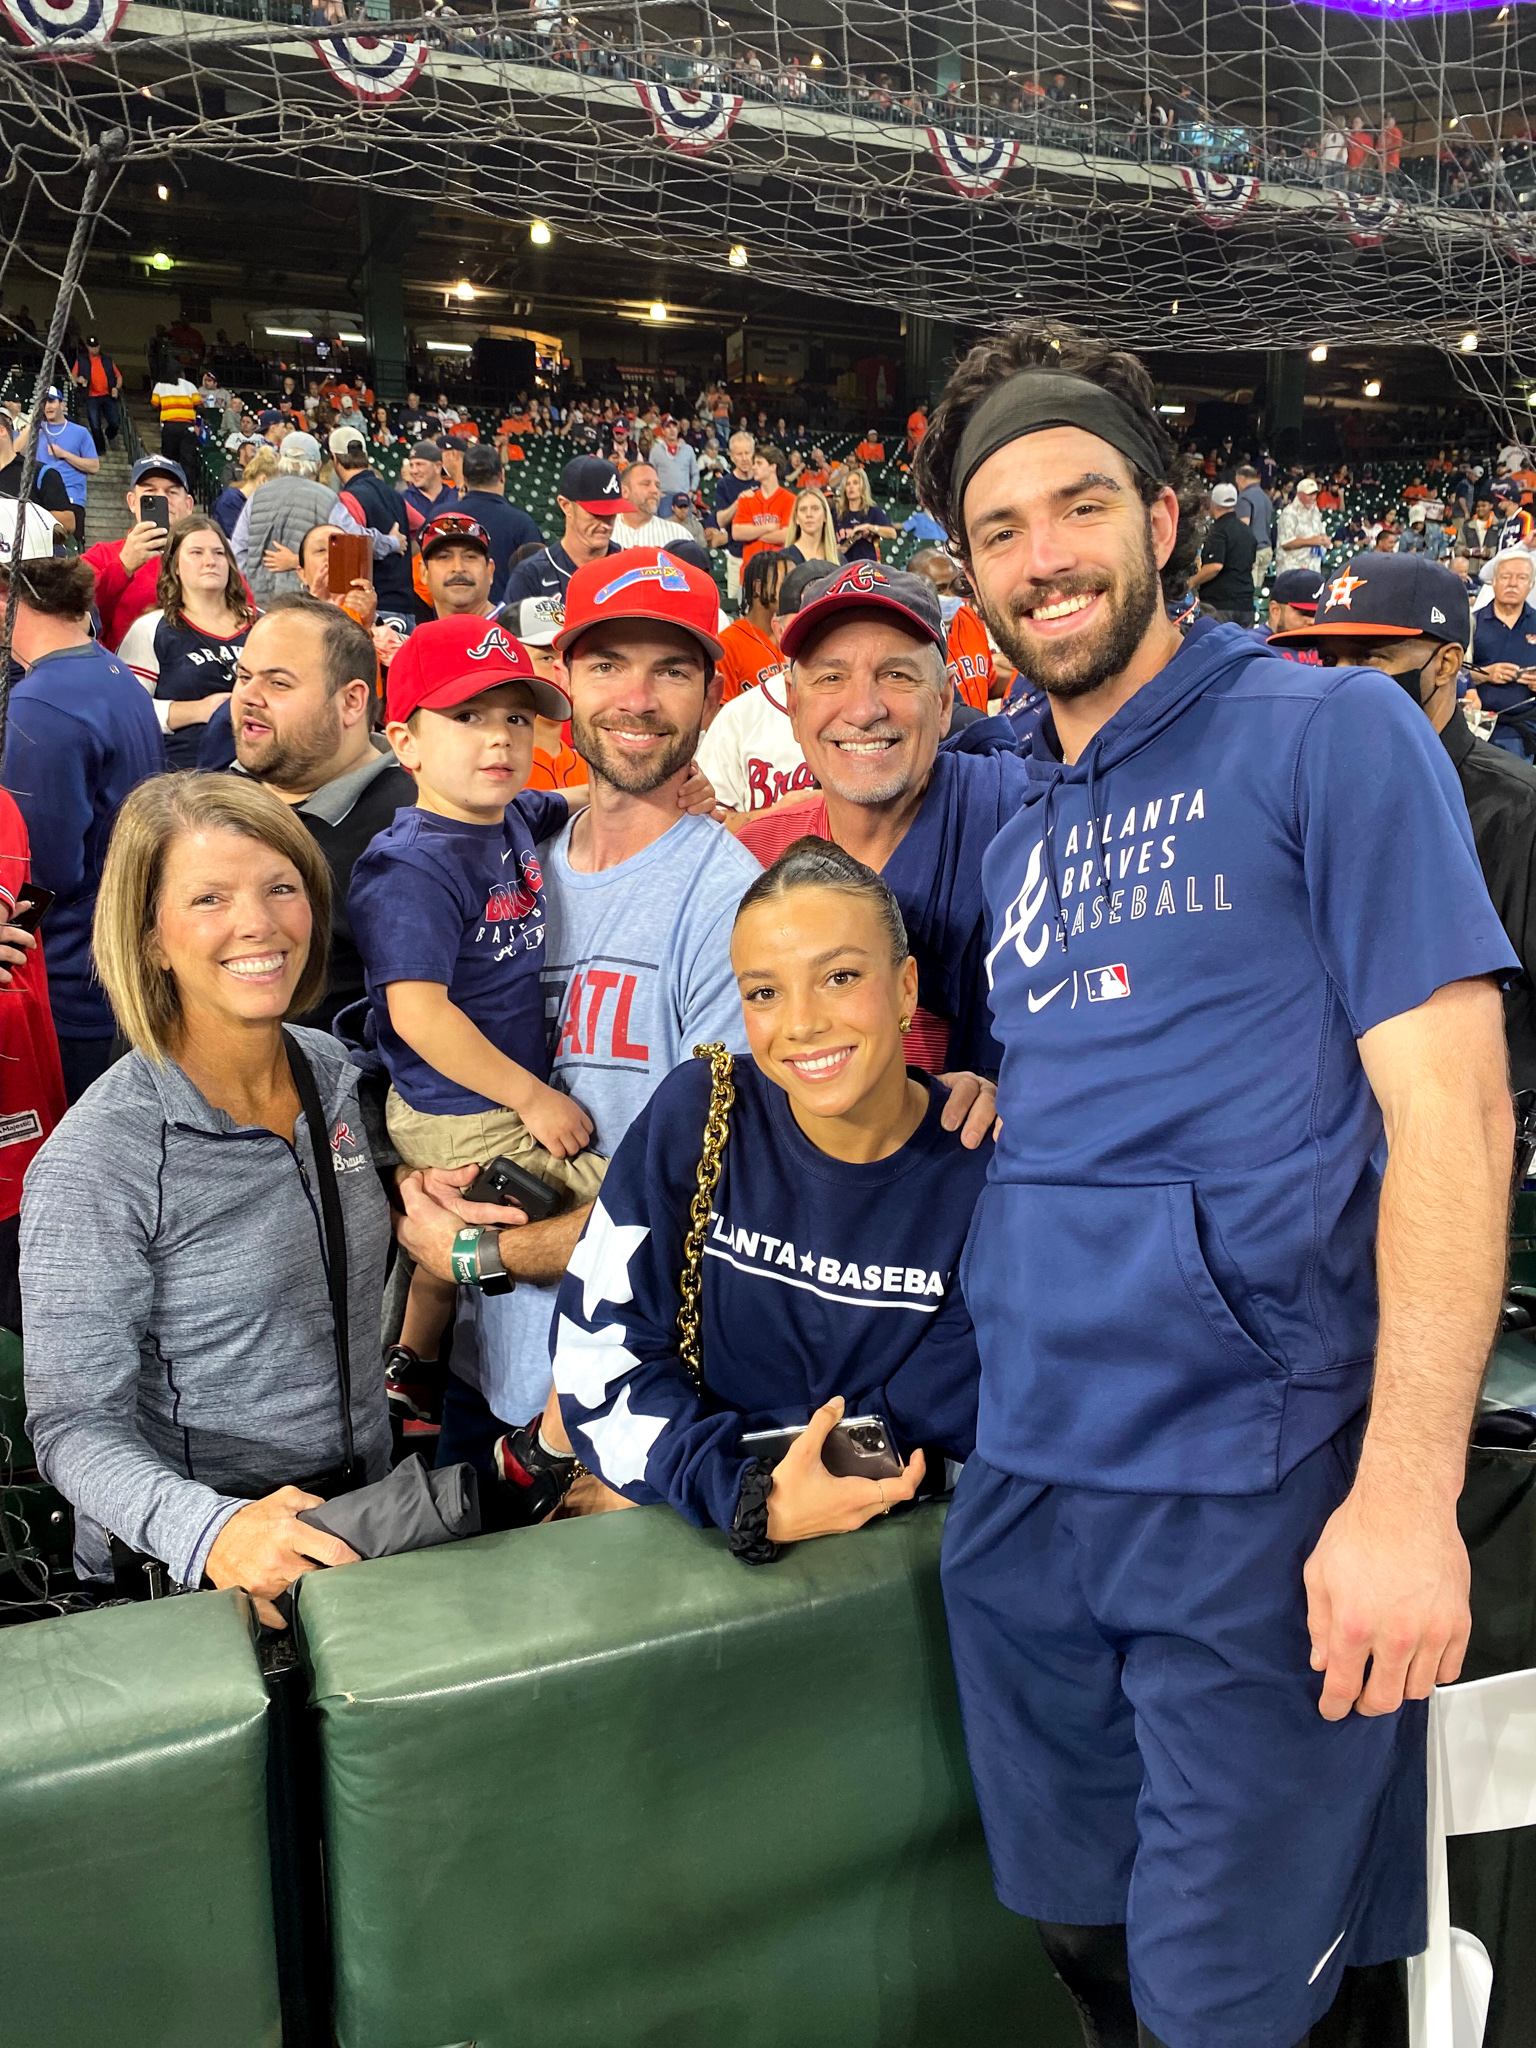 dansby swanson sister